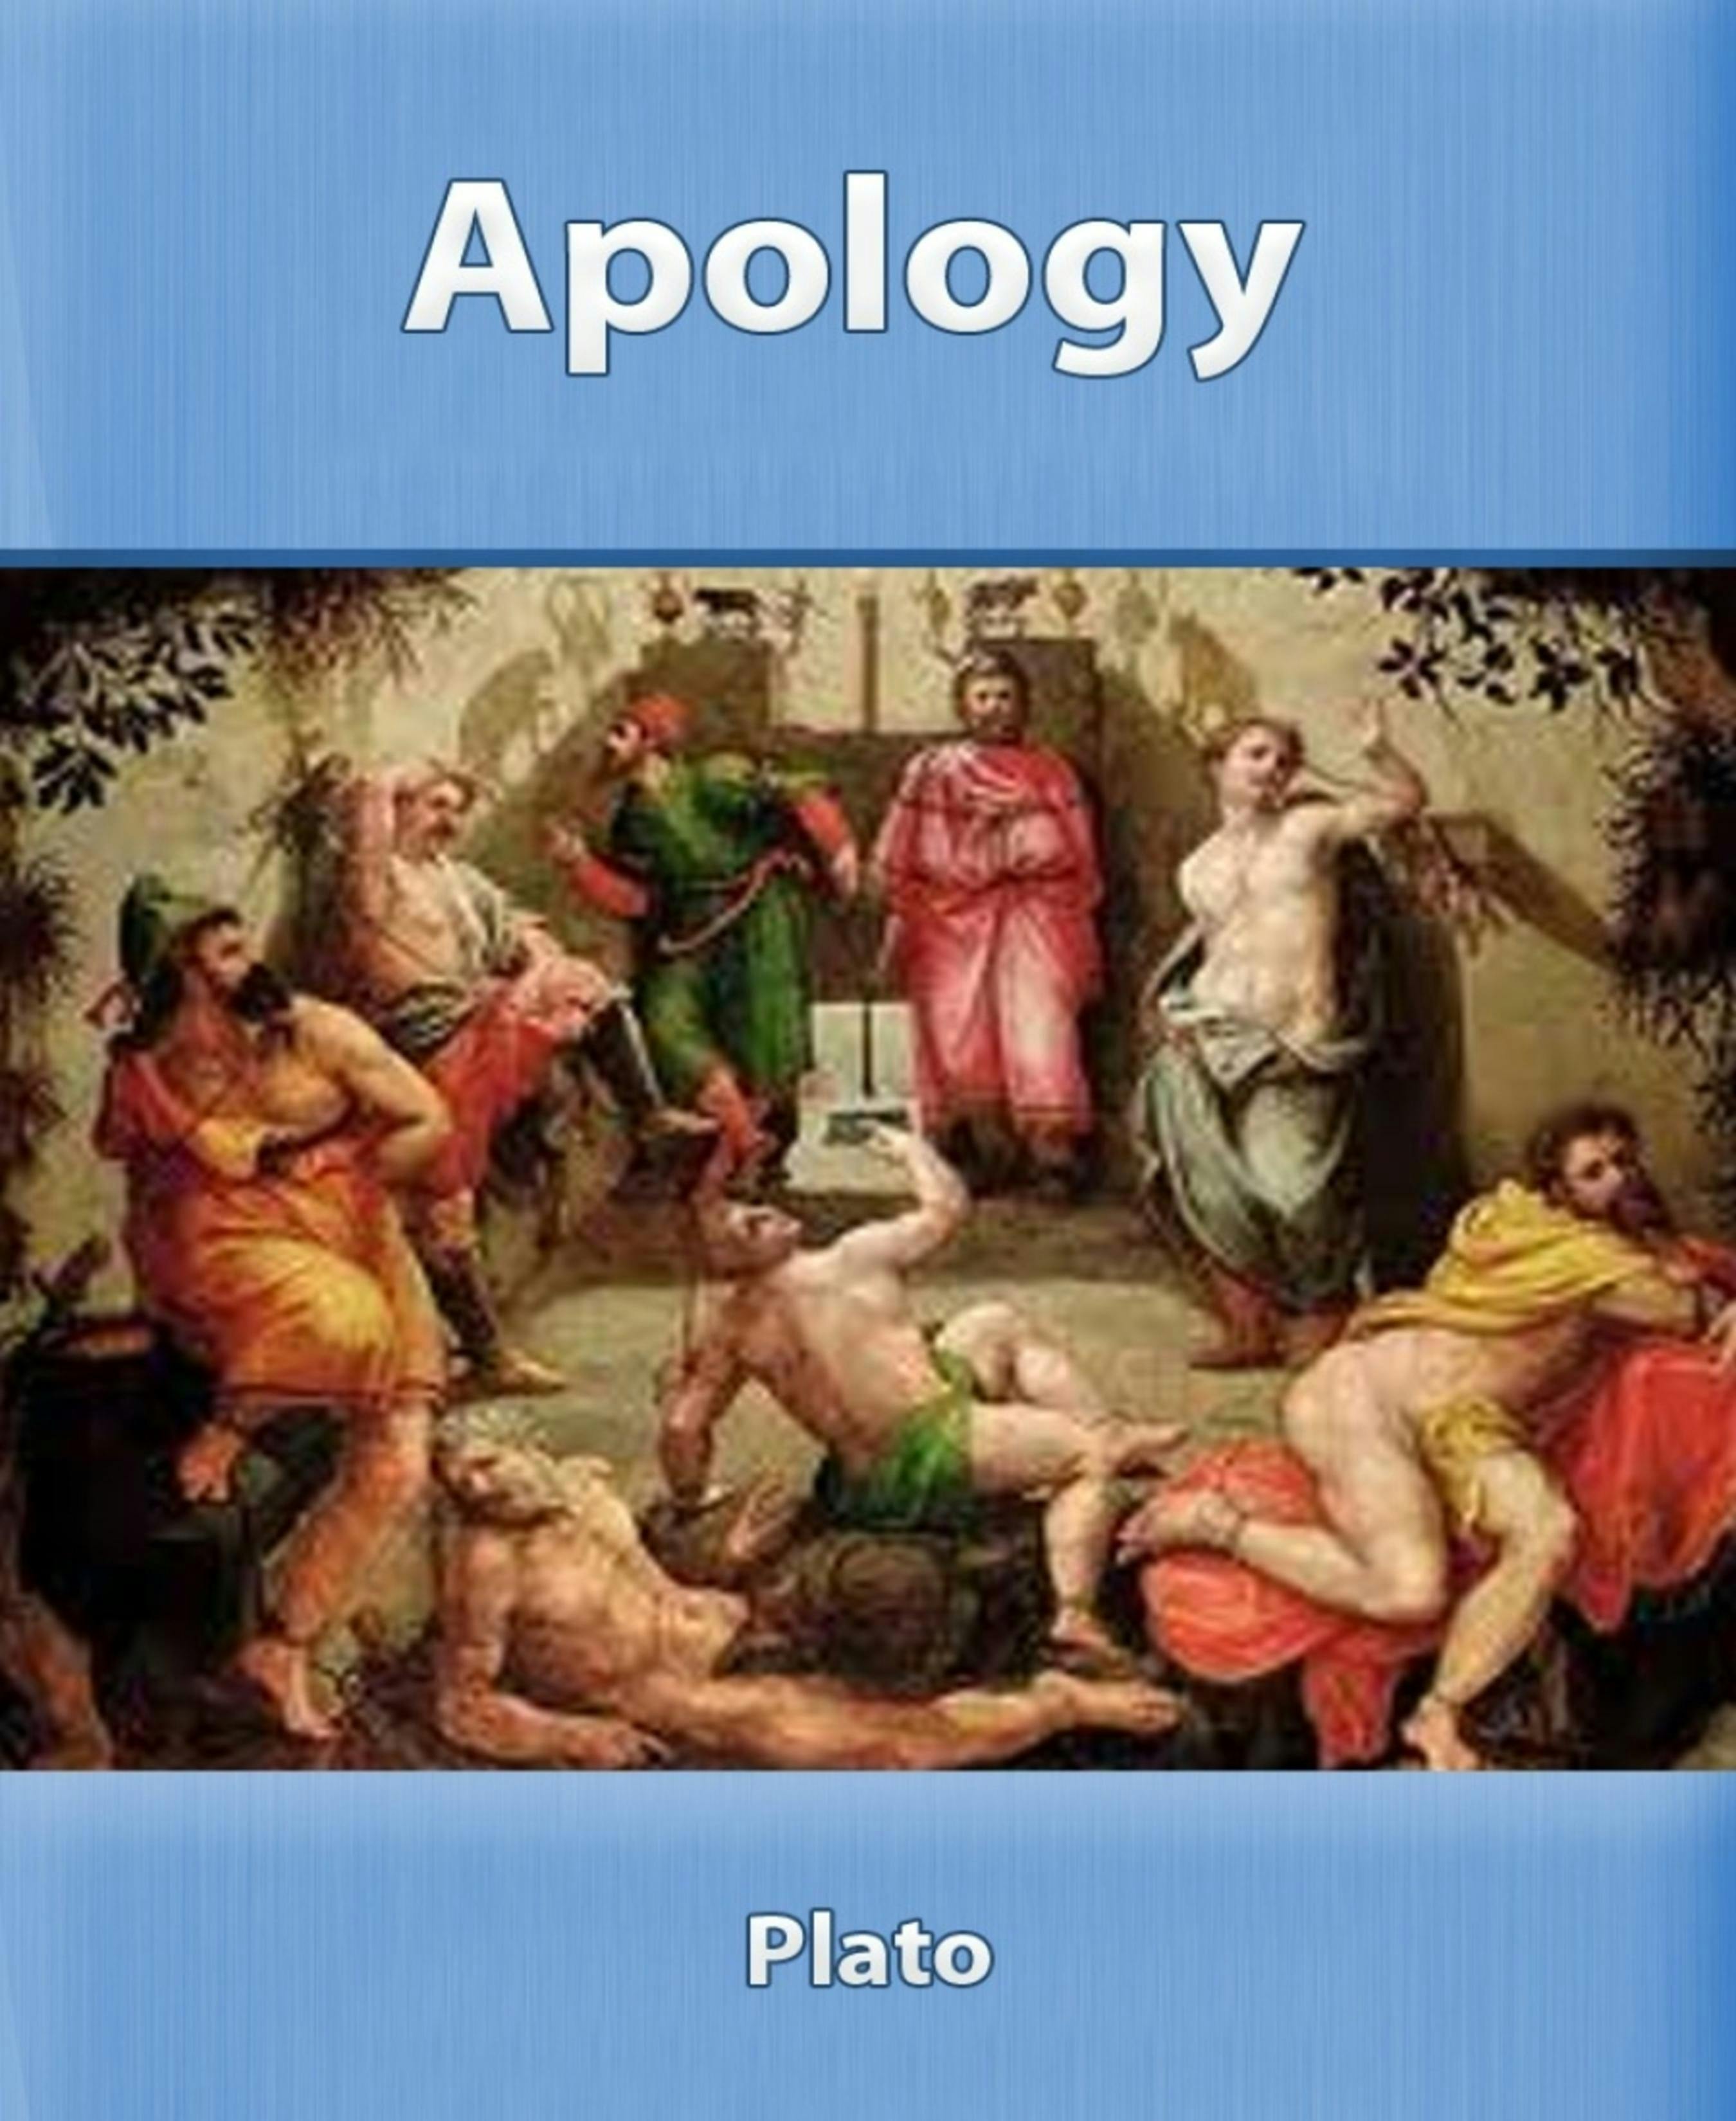 Apology - By Plato